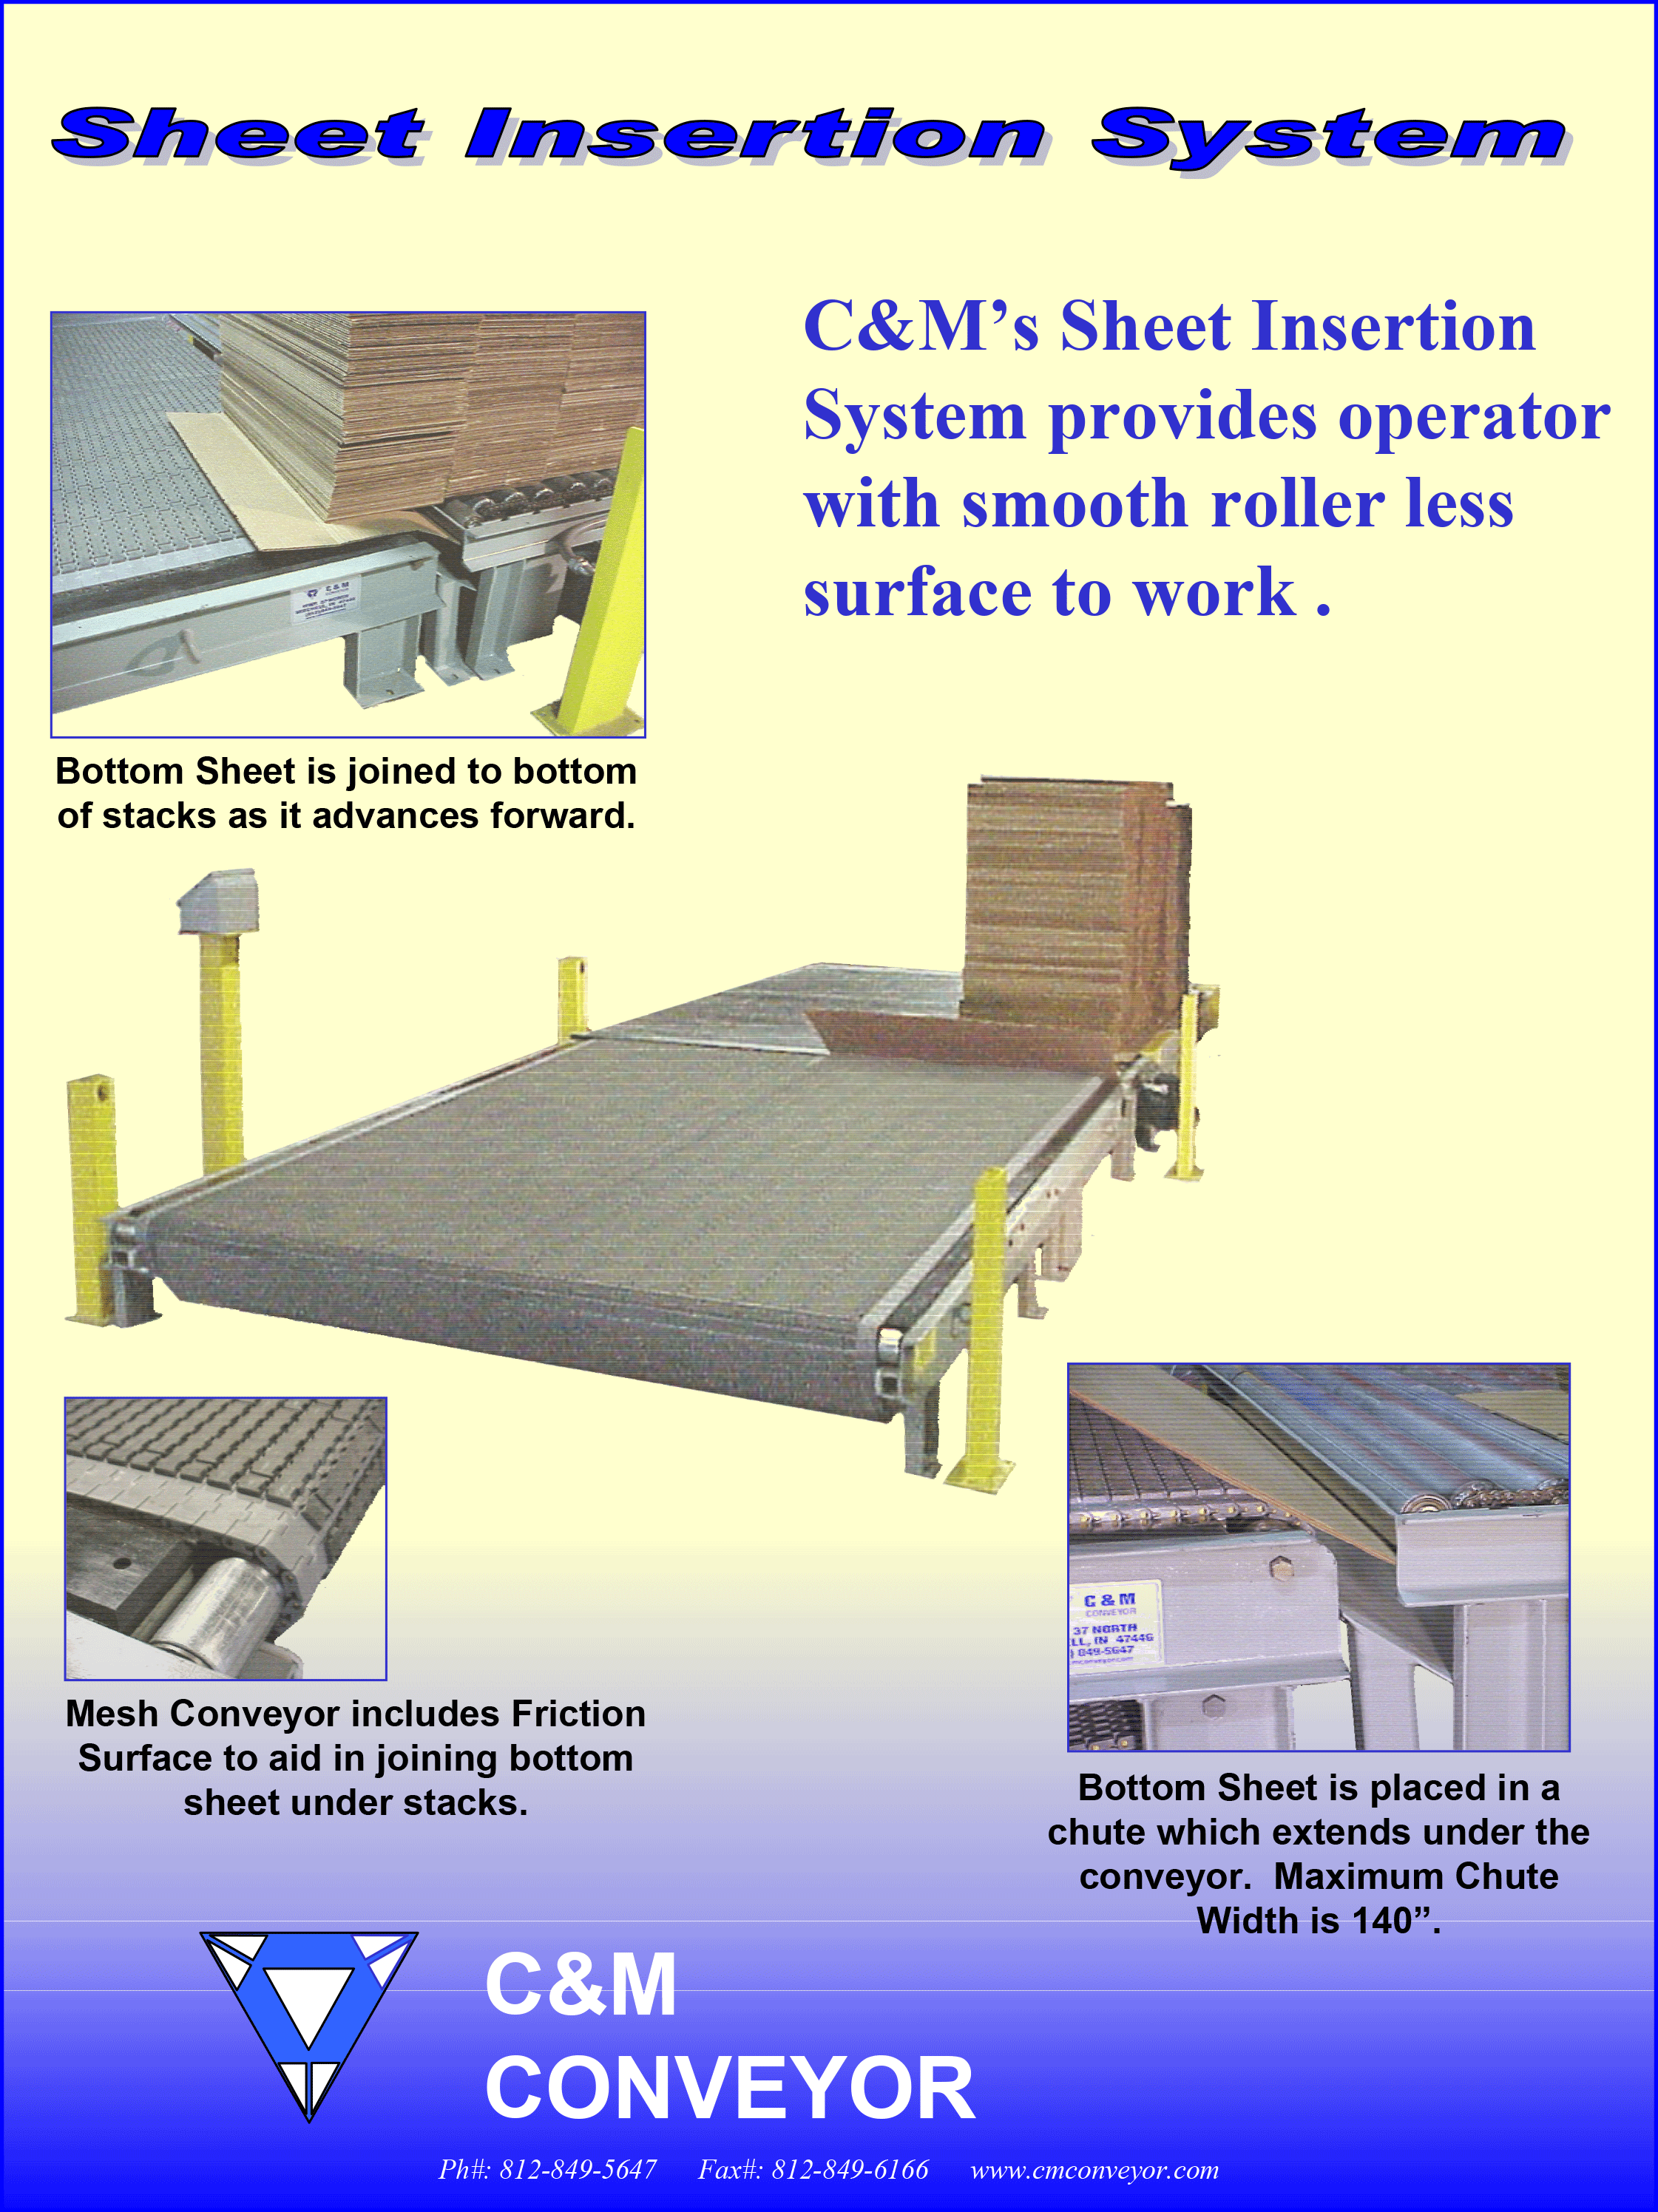 C & M’s Sheet Insertion System can easily be added to join a bottom sheet to the bottom of stacks as it advances forward.  